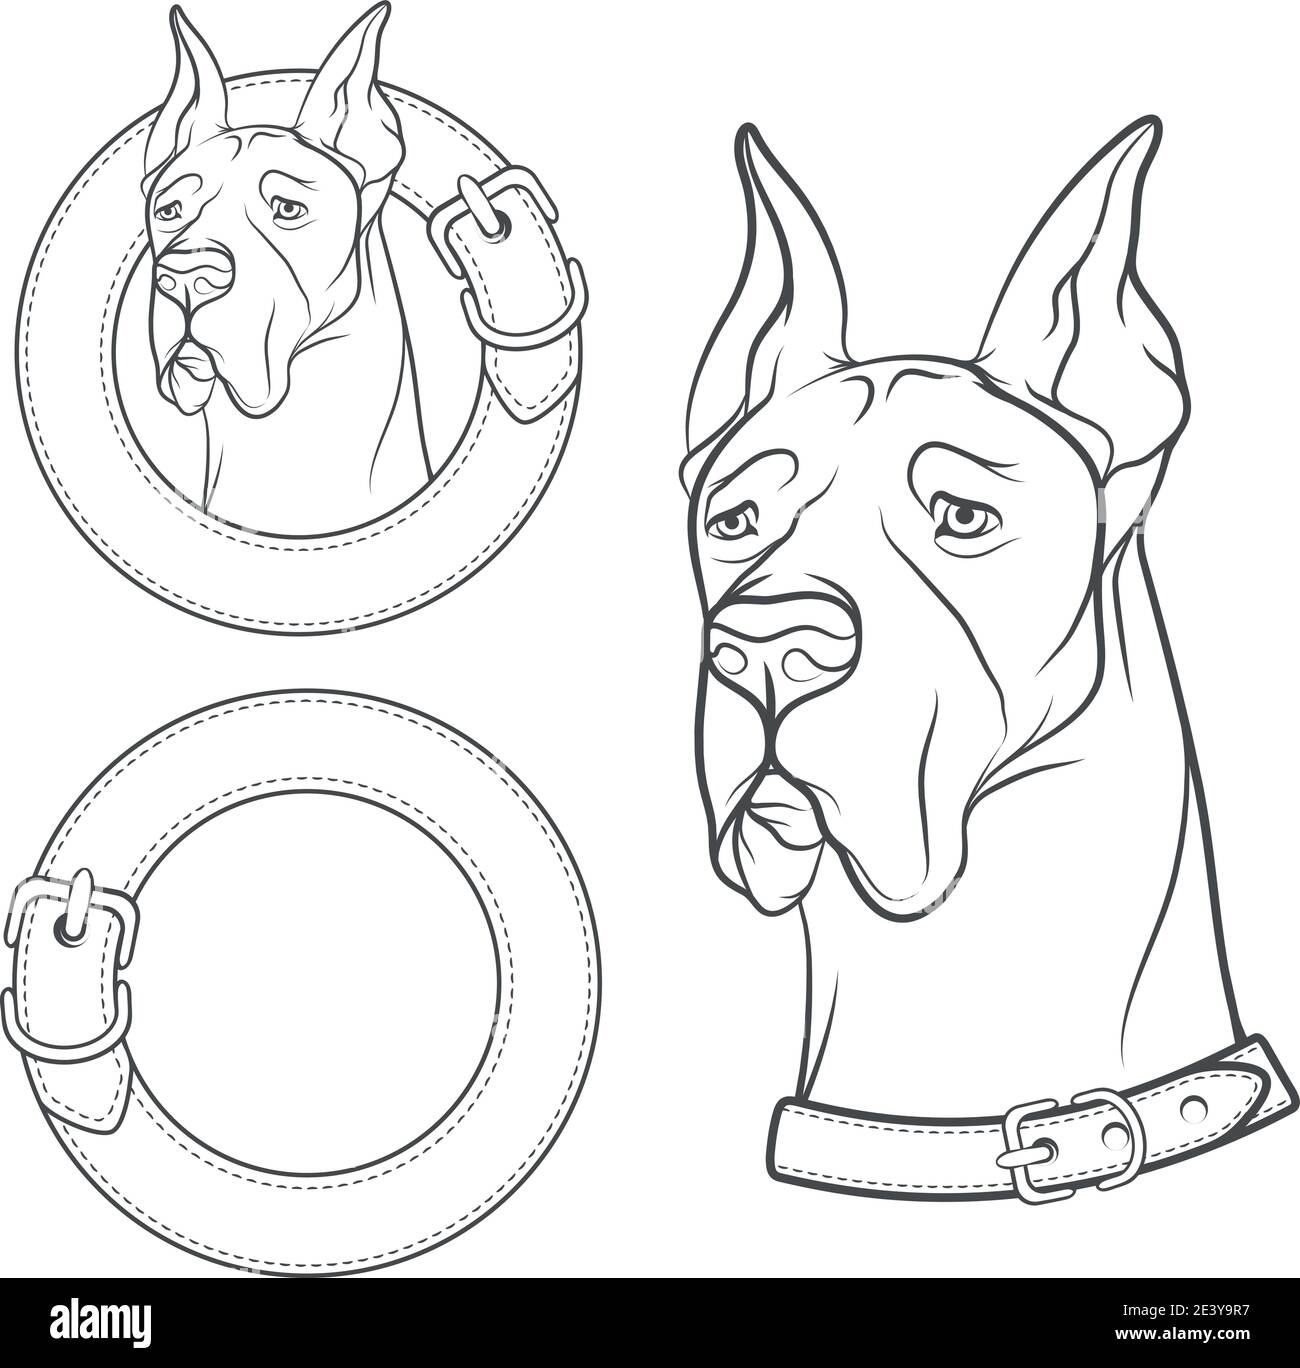 Set of vector drawing of the dog in the collar. Isolated objects on a white background. Stock Vector